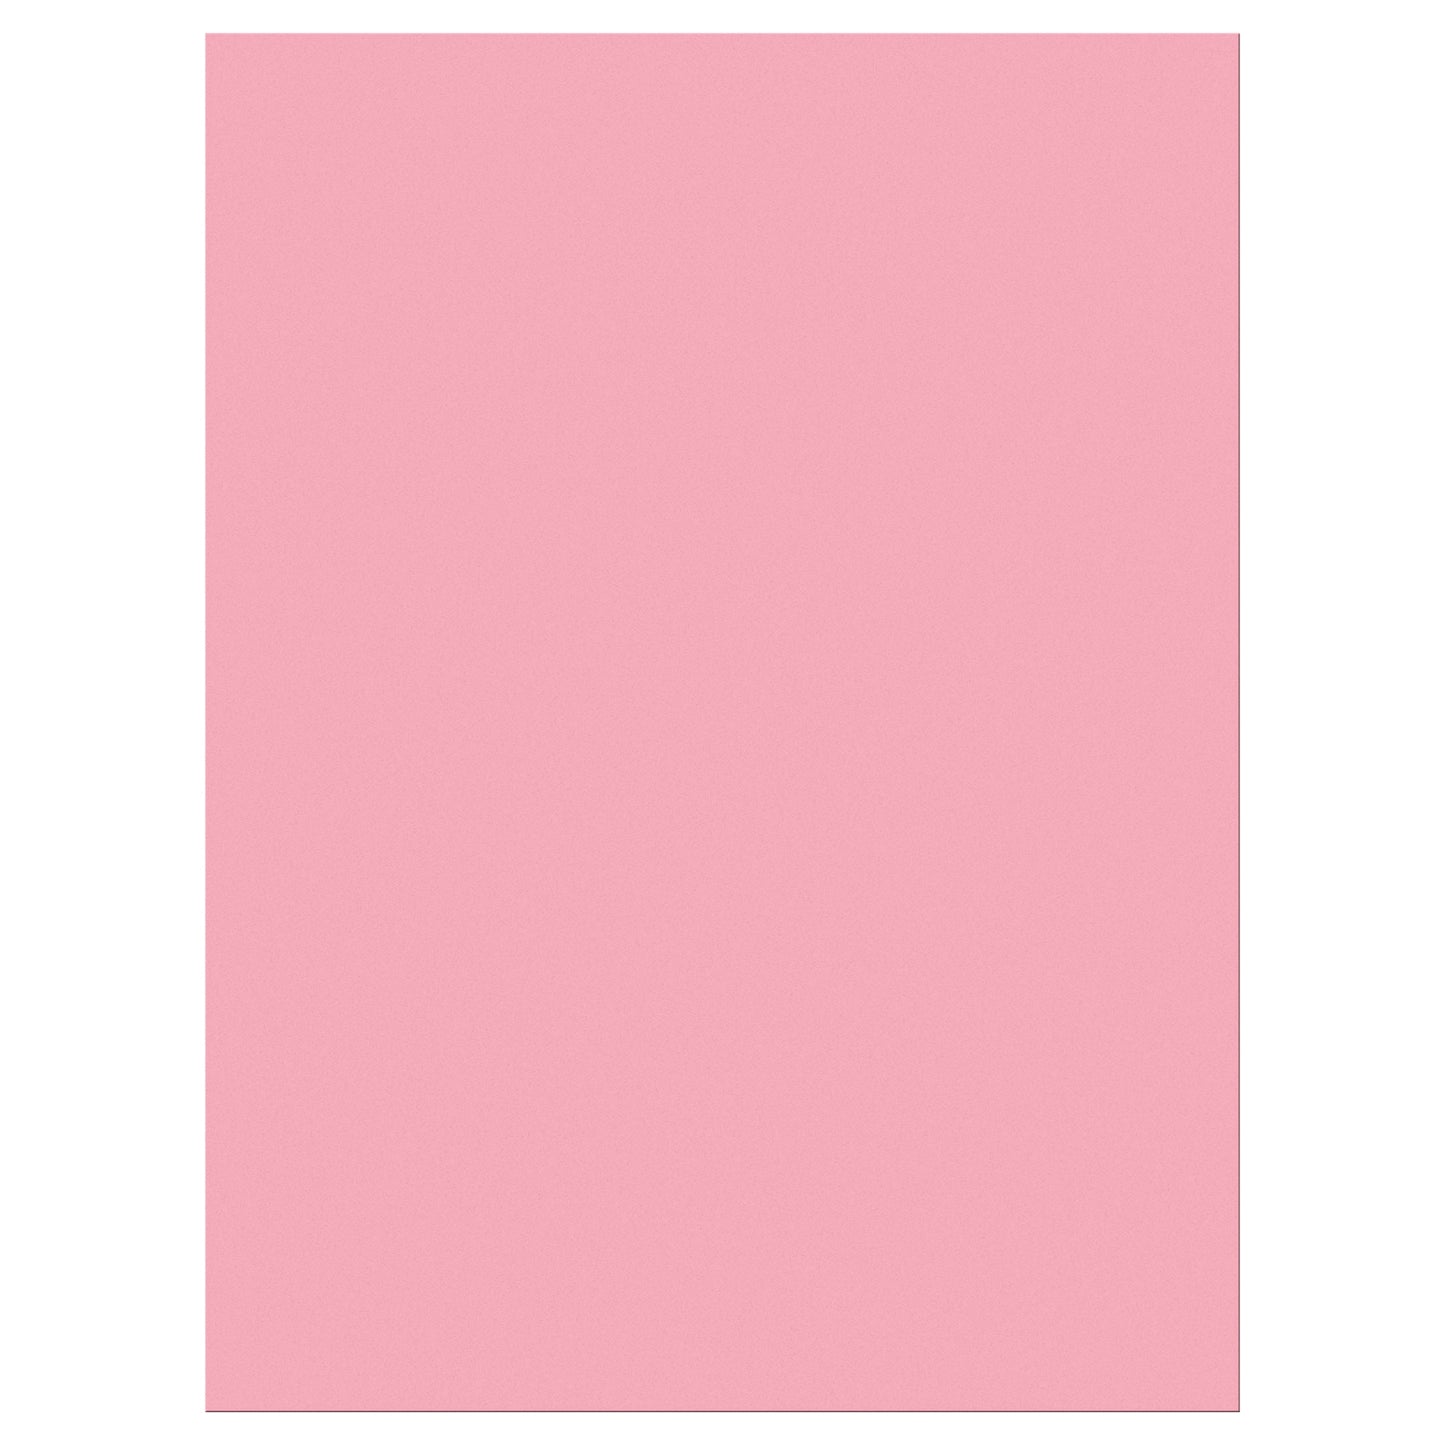 Construction Paper, Pink, 9" x 12", 50 Sheets Per Pack, 10 Packs